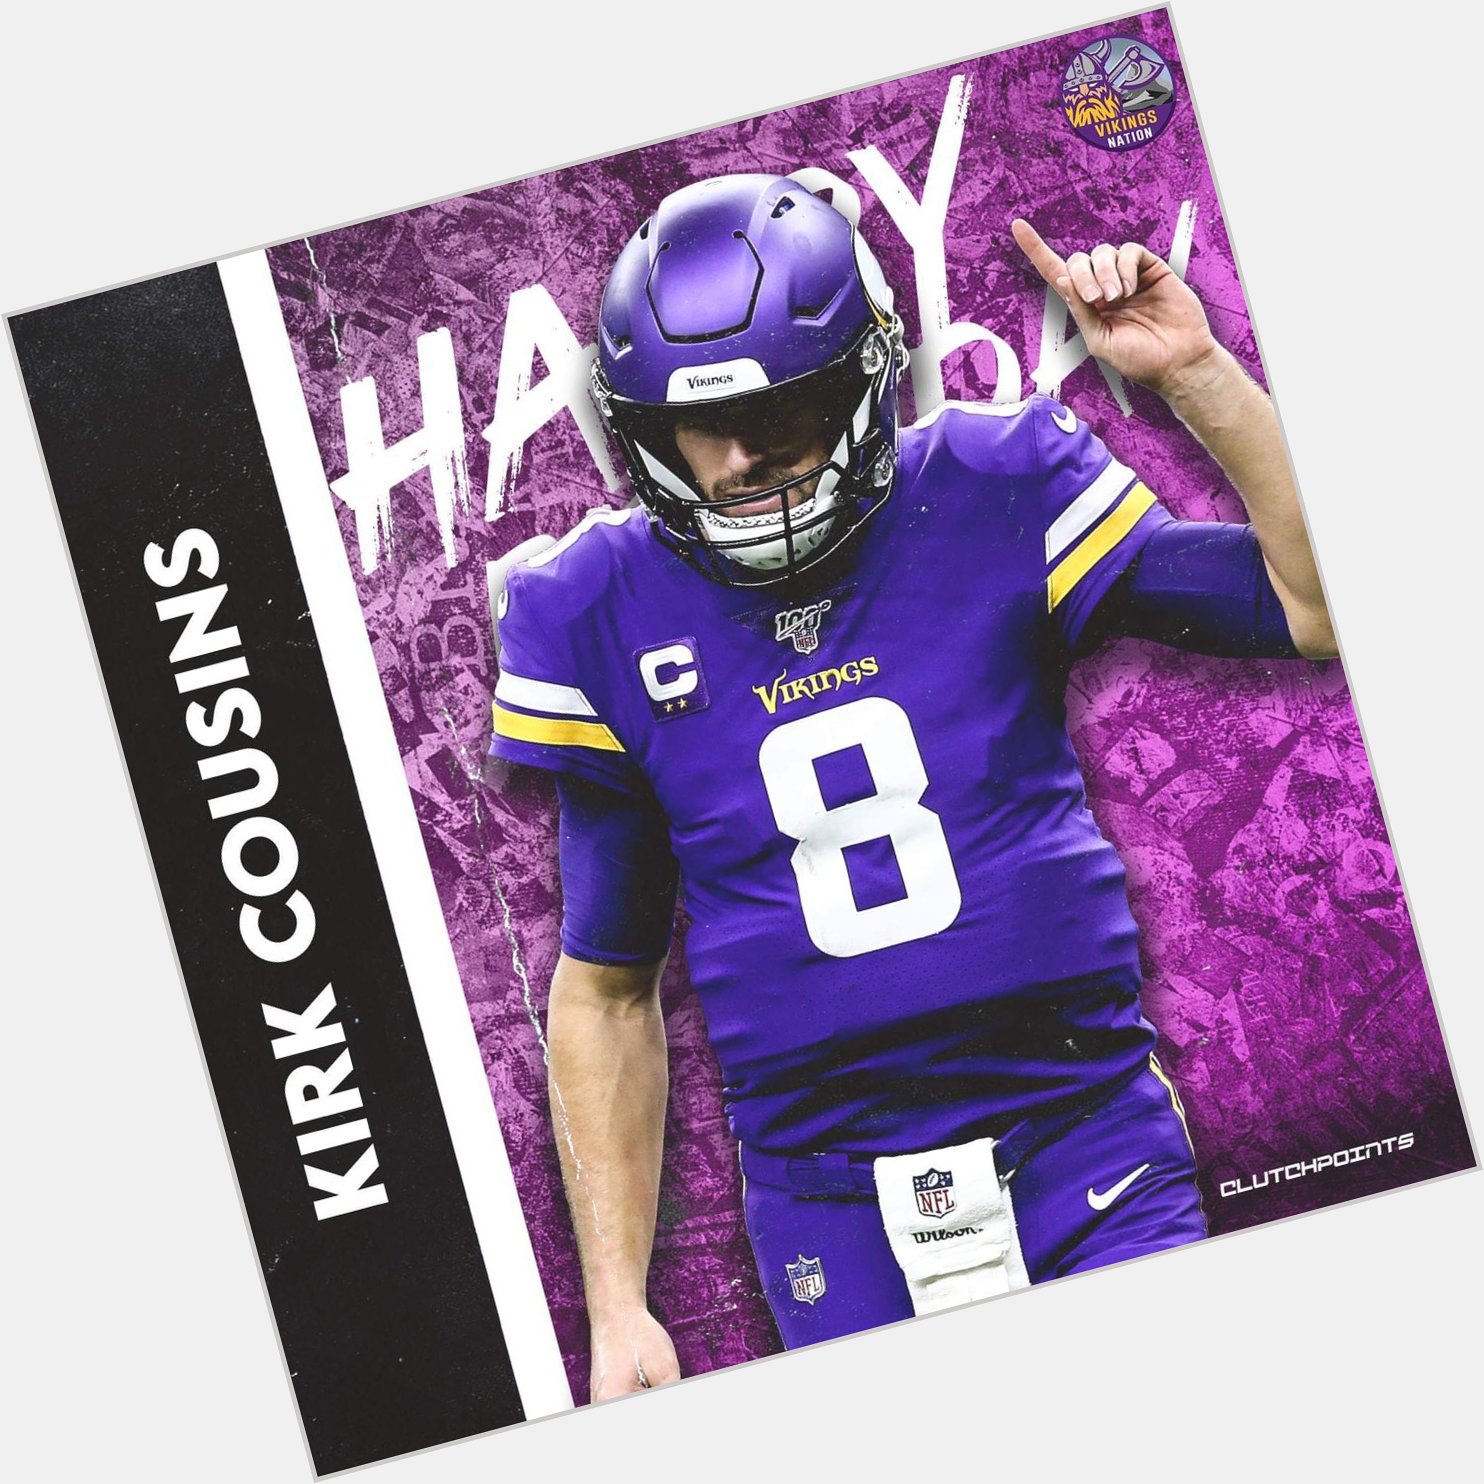 Join Vikings Nation in greeting 2x Pro Bowler Kirk Cousins a happy 33rd birthday!  